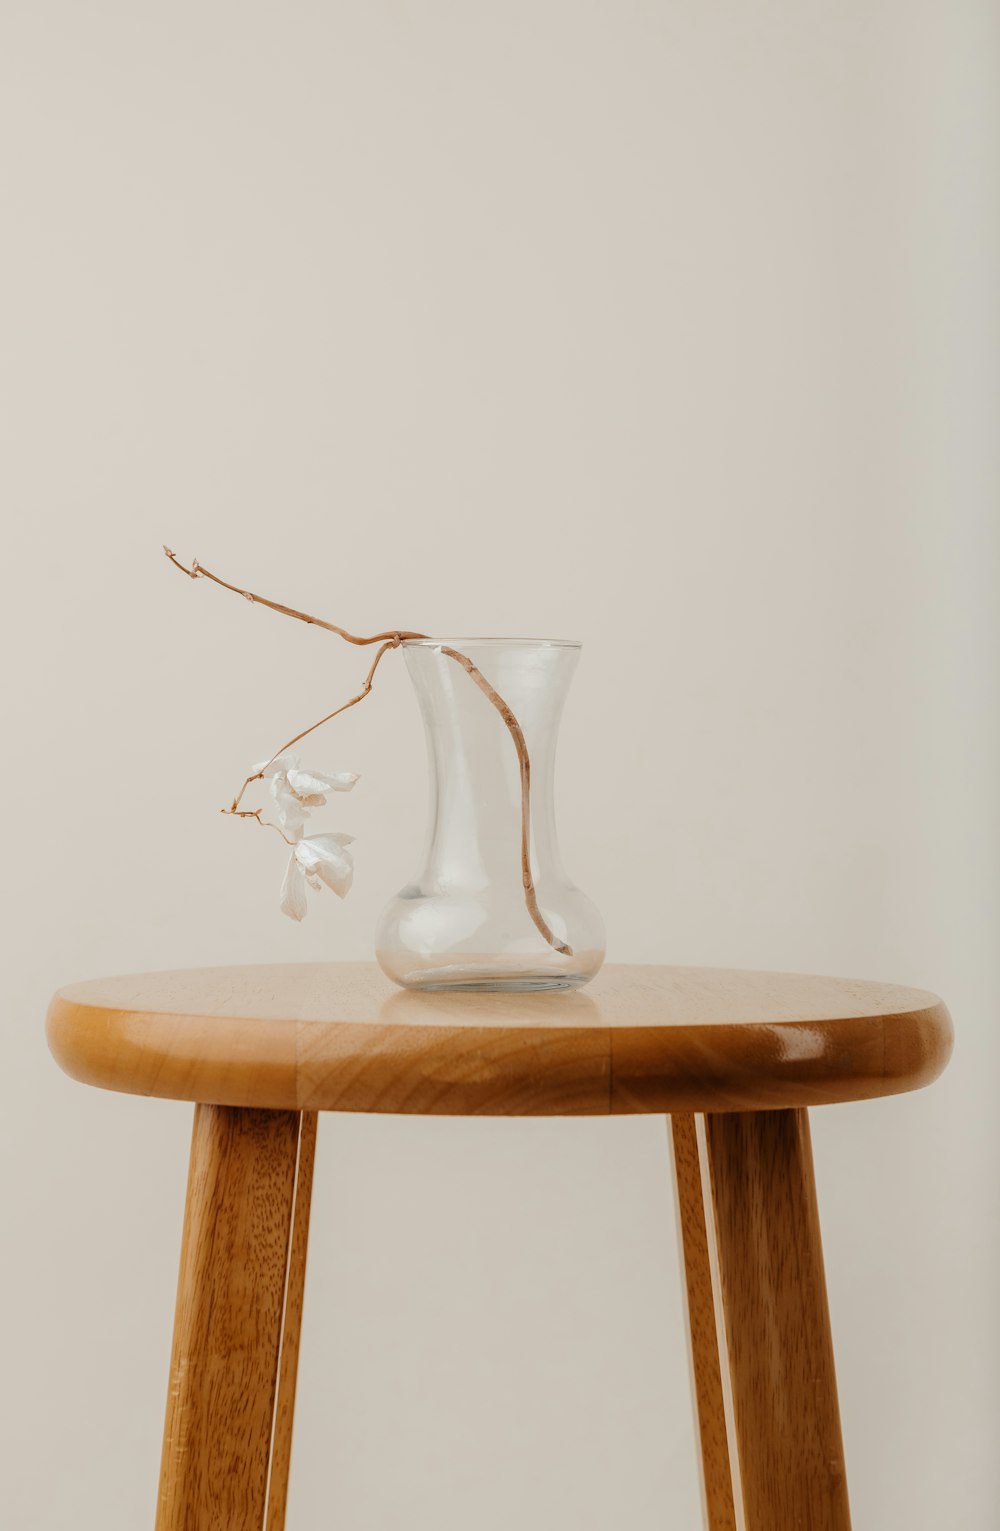 clear glass vase on brown wooden table